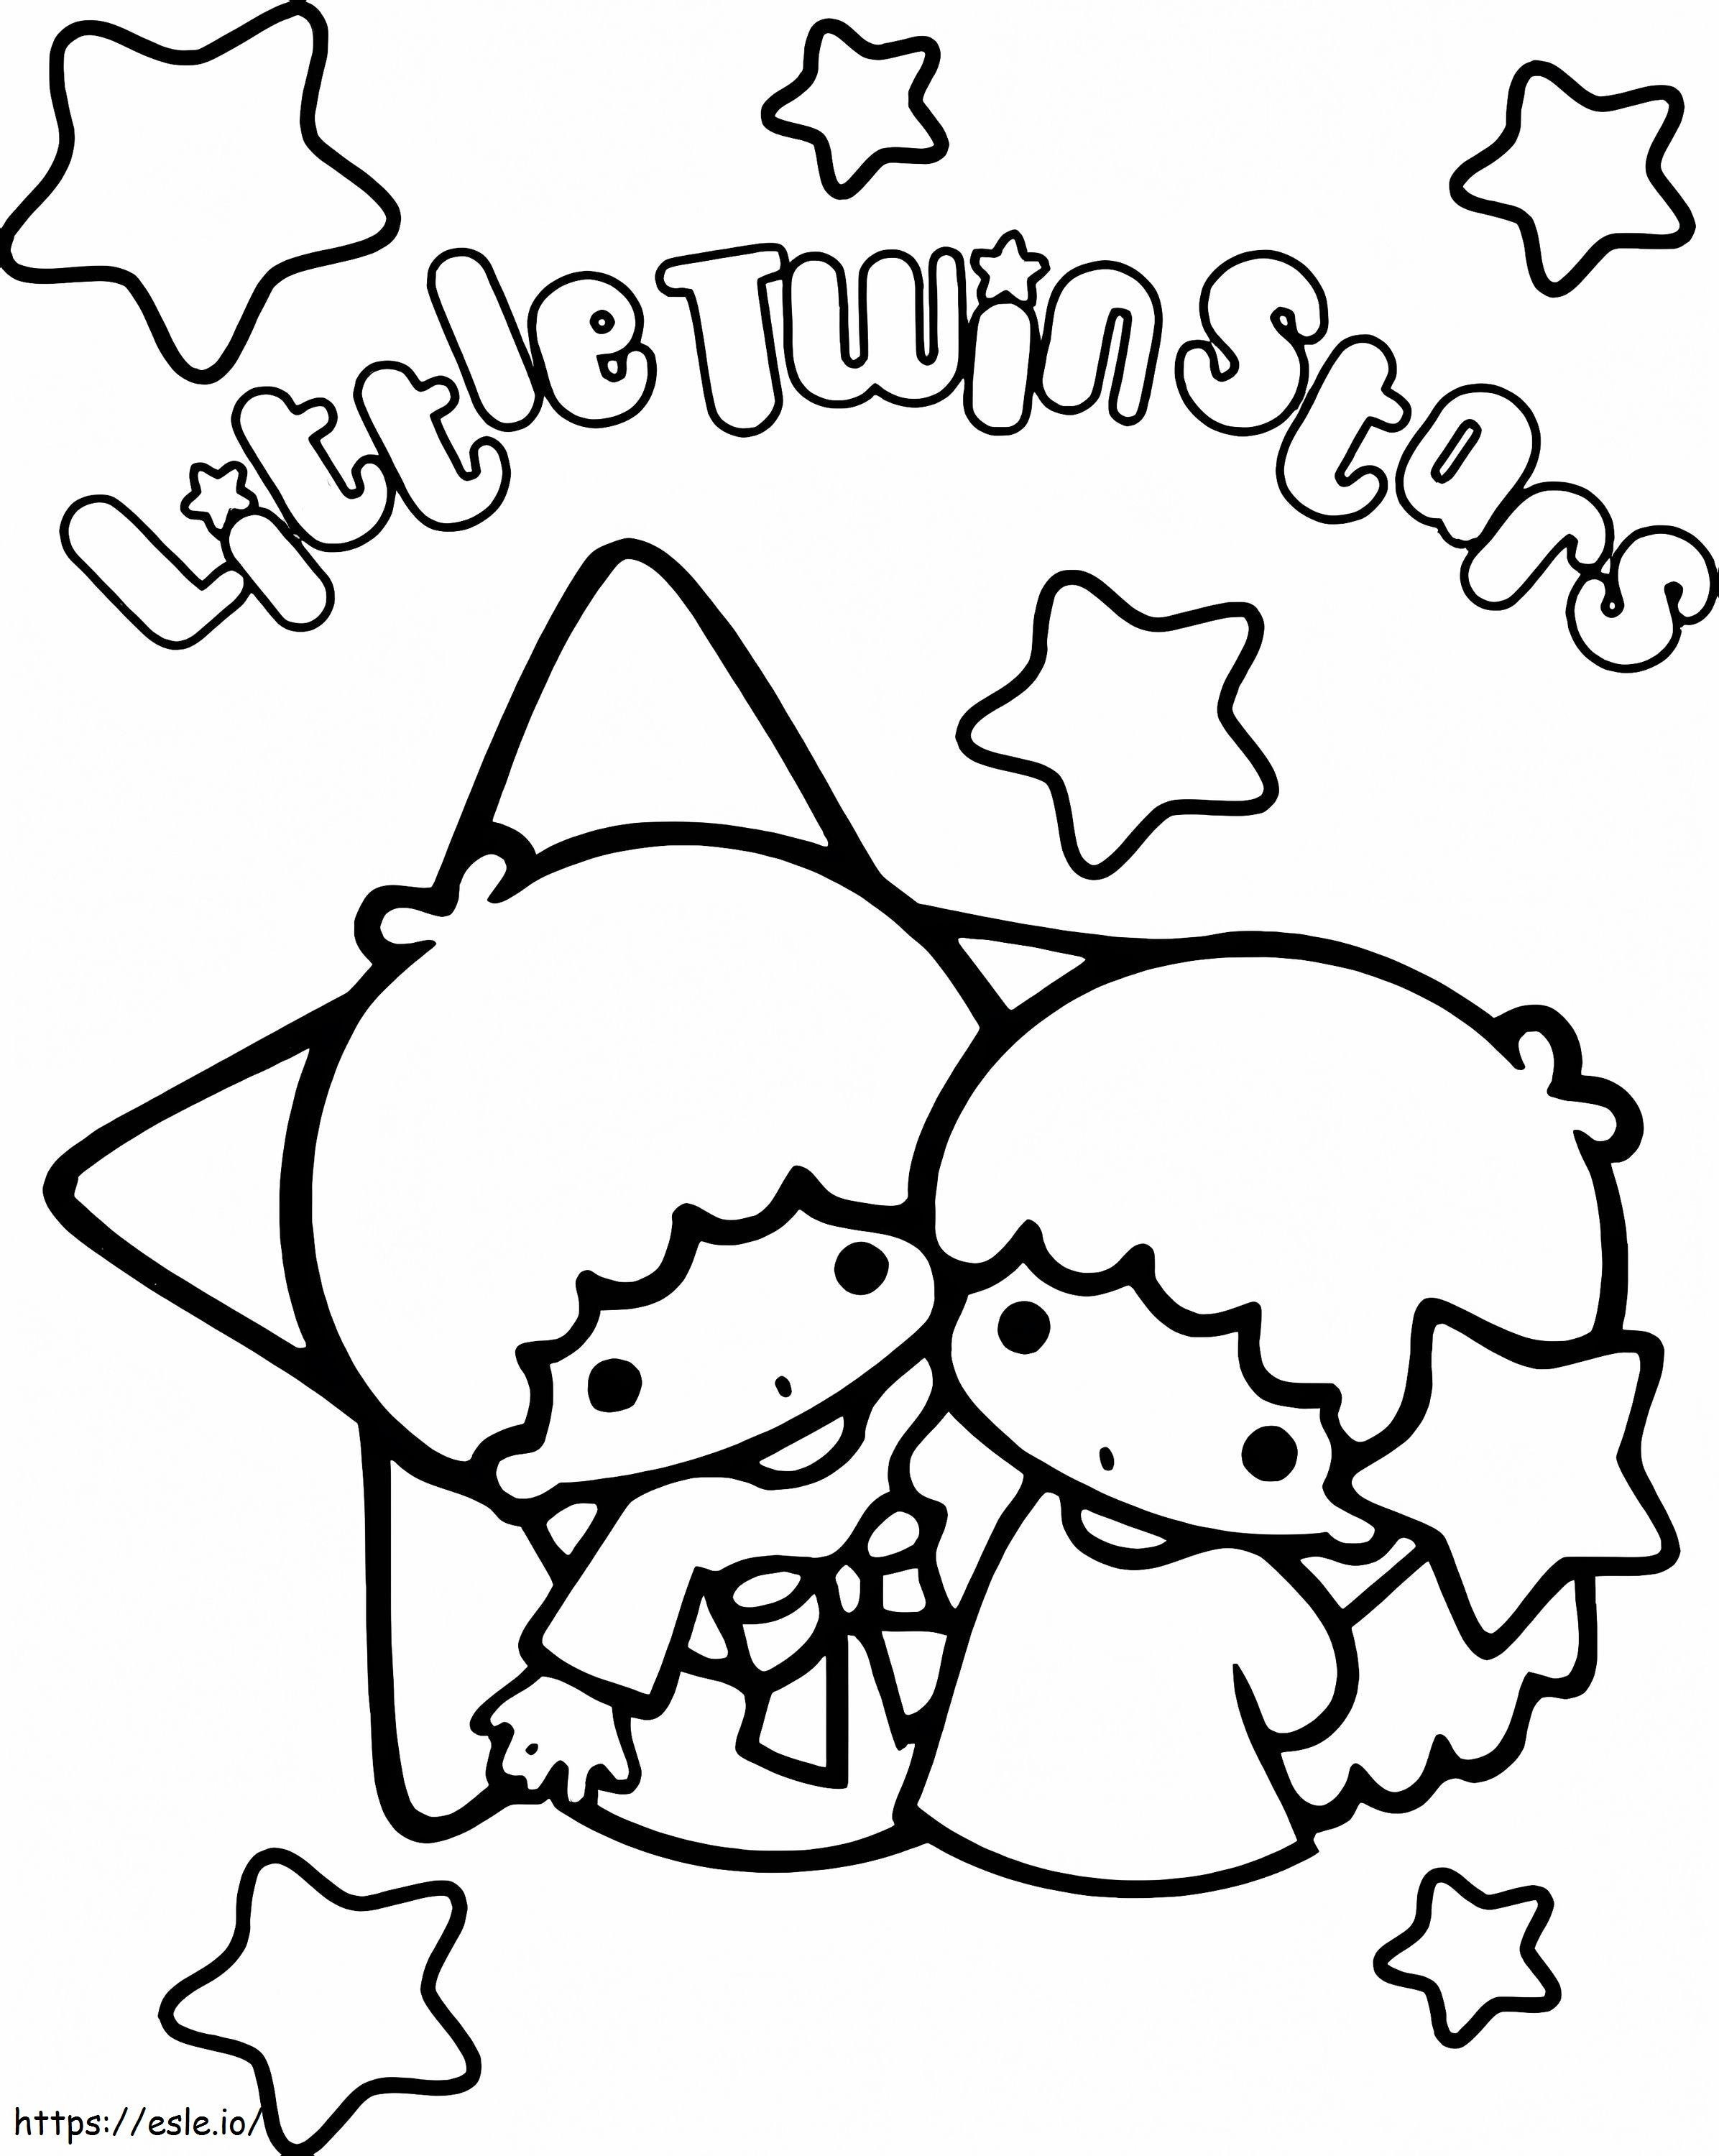 Lovely Little Twin Stars coloring page